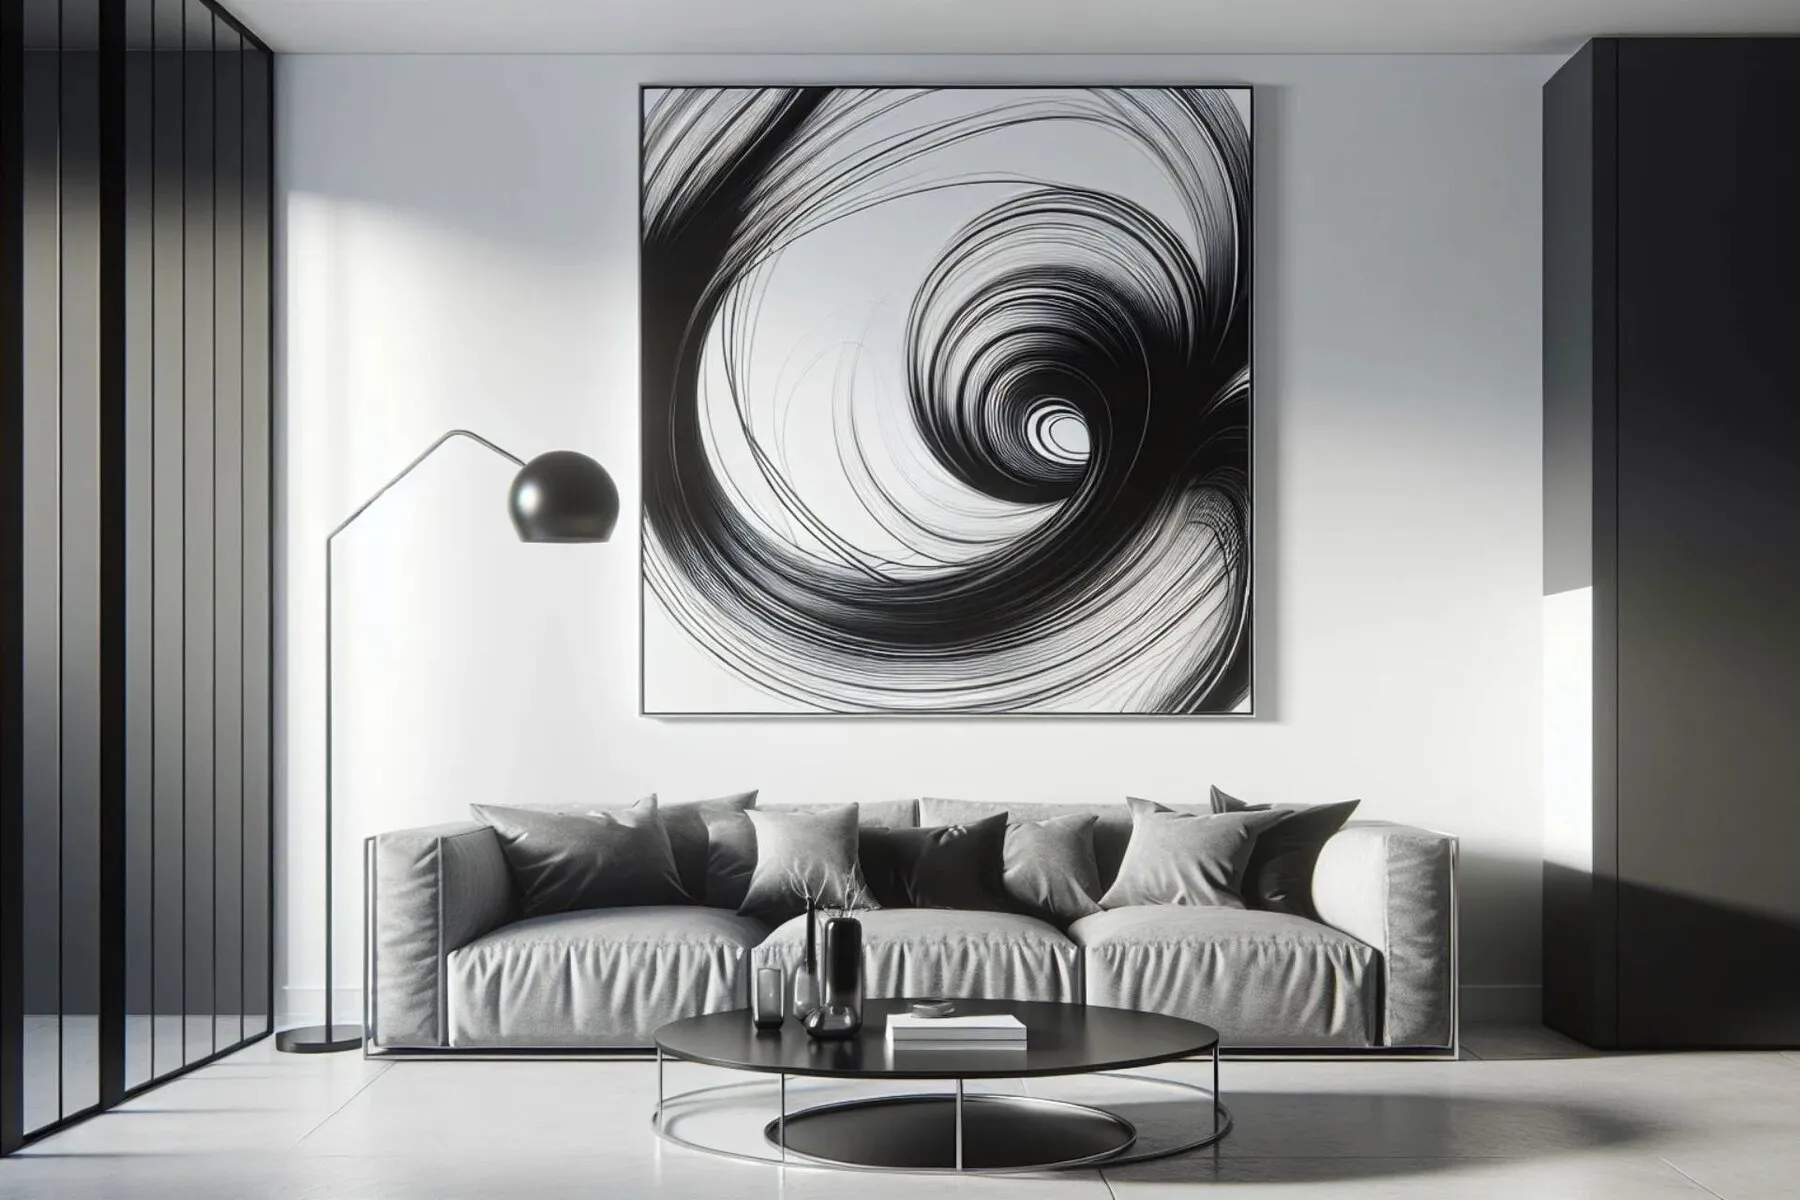 Large wall art in a modern living room